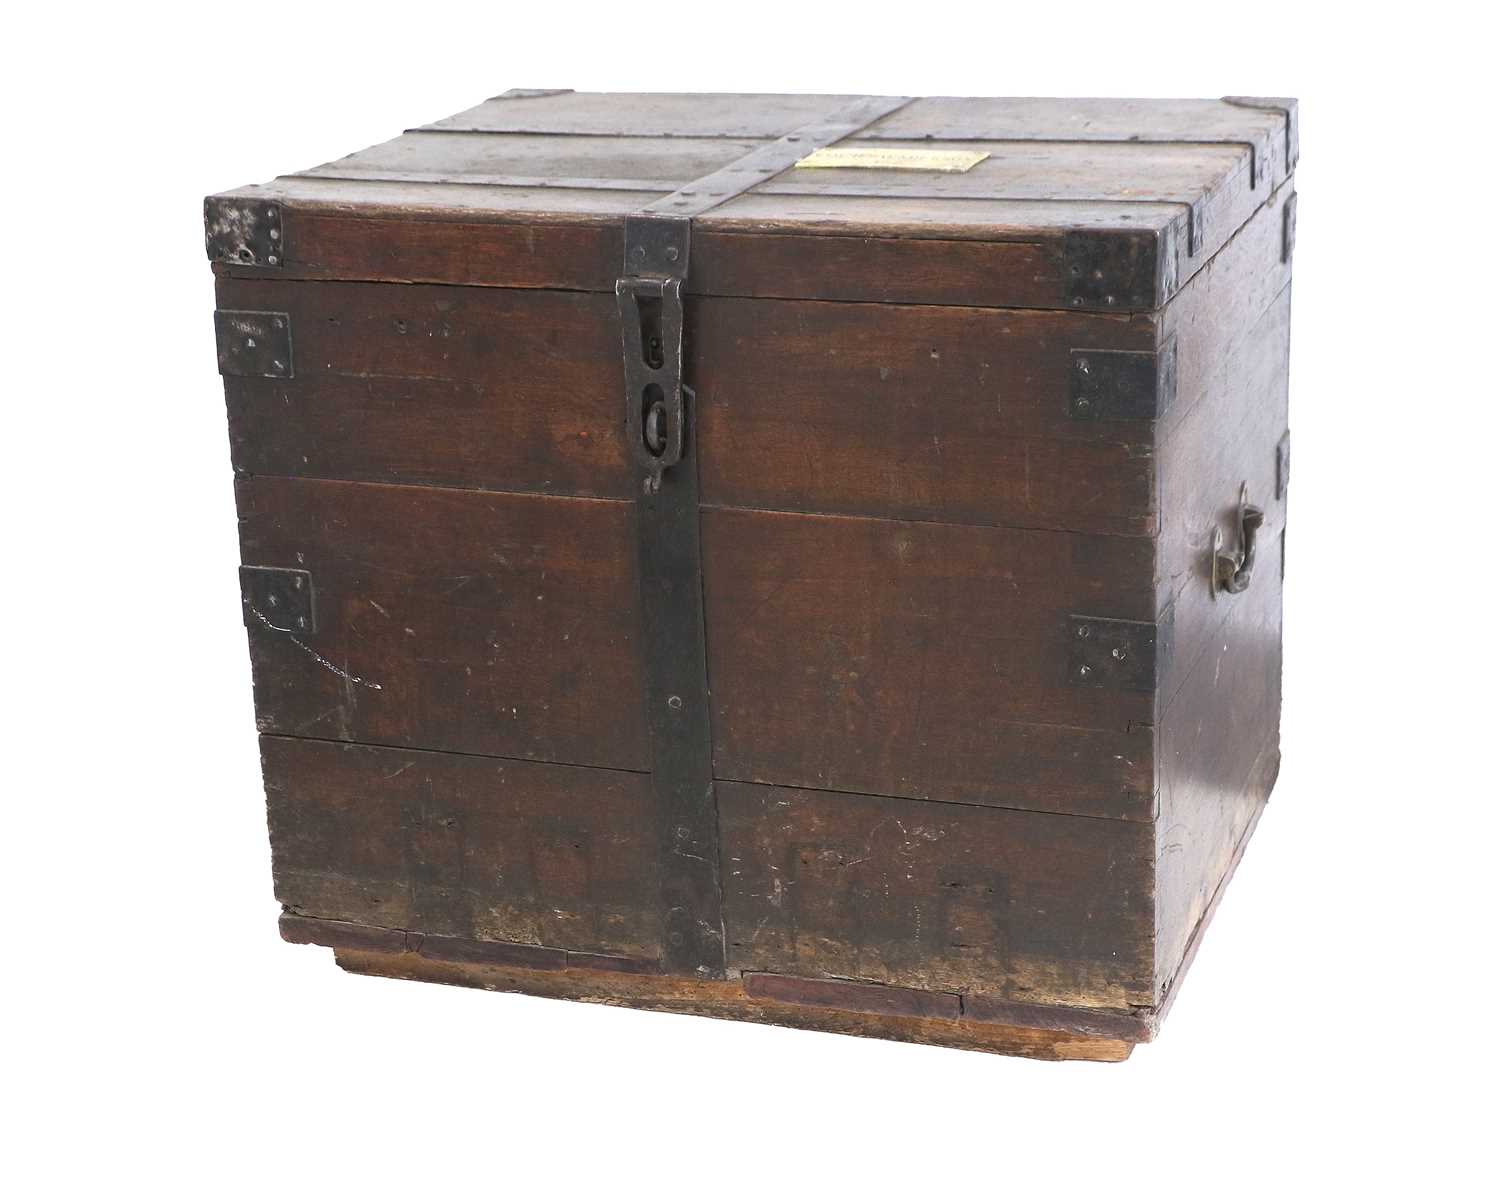 An Early 19th Century Oak and Metal-Bound Silver Chest or Travel Trunk, the hinged lid with an